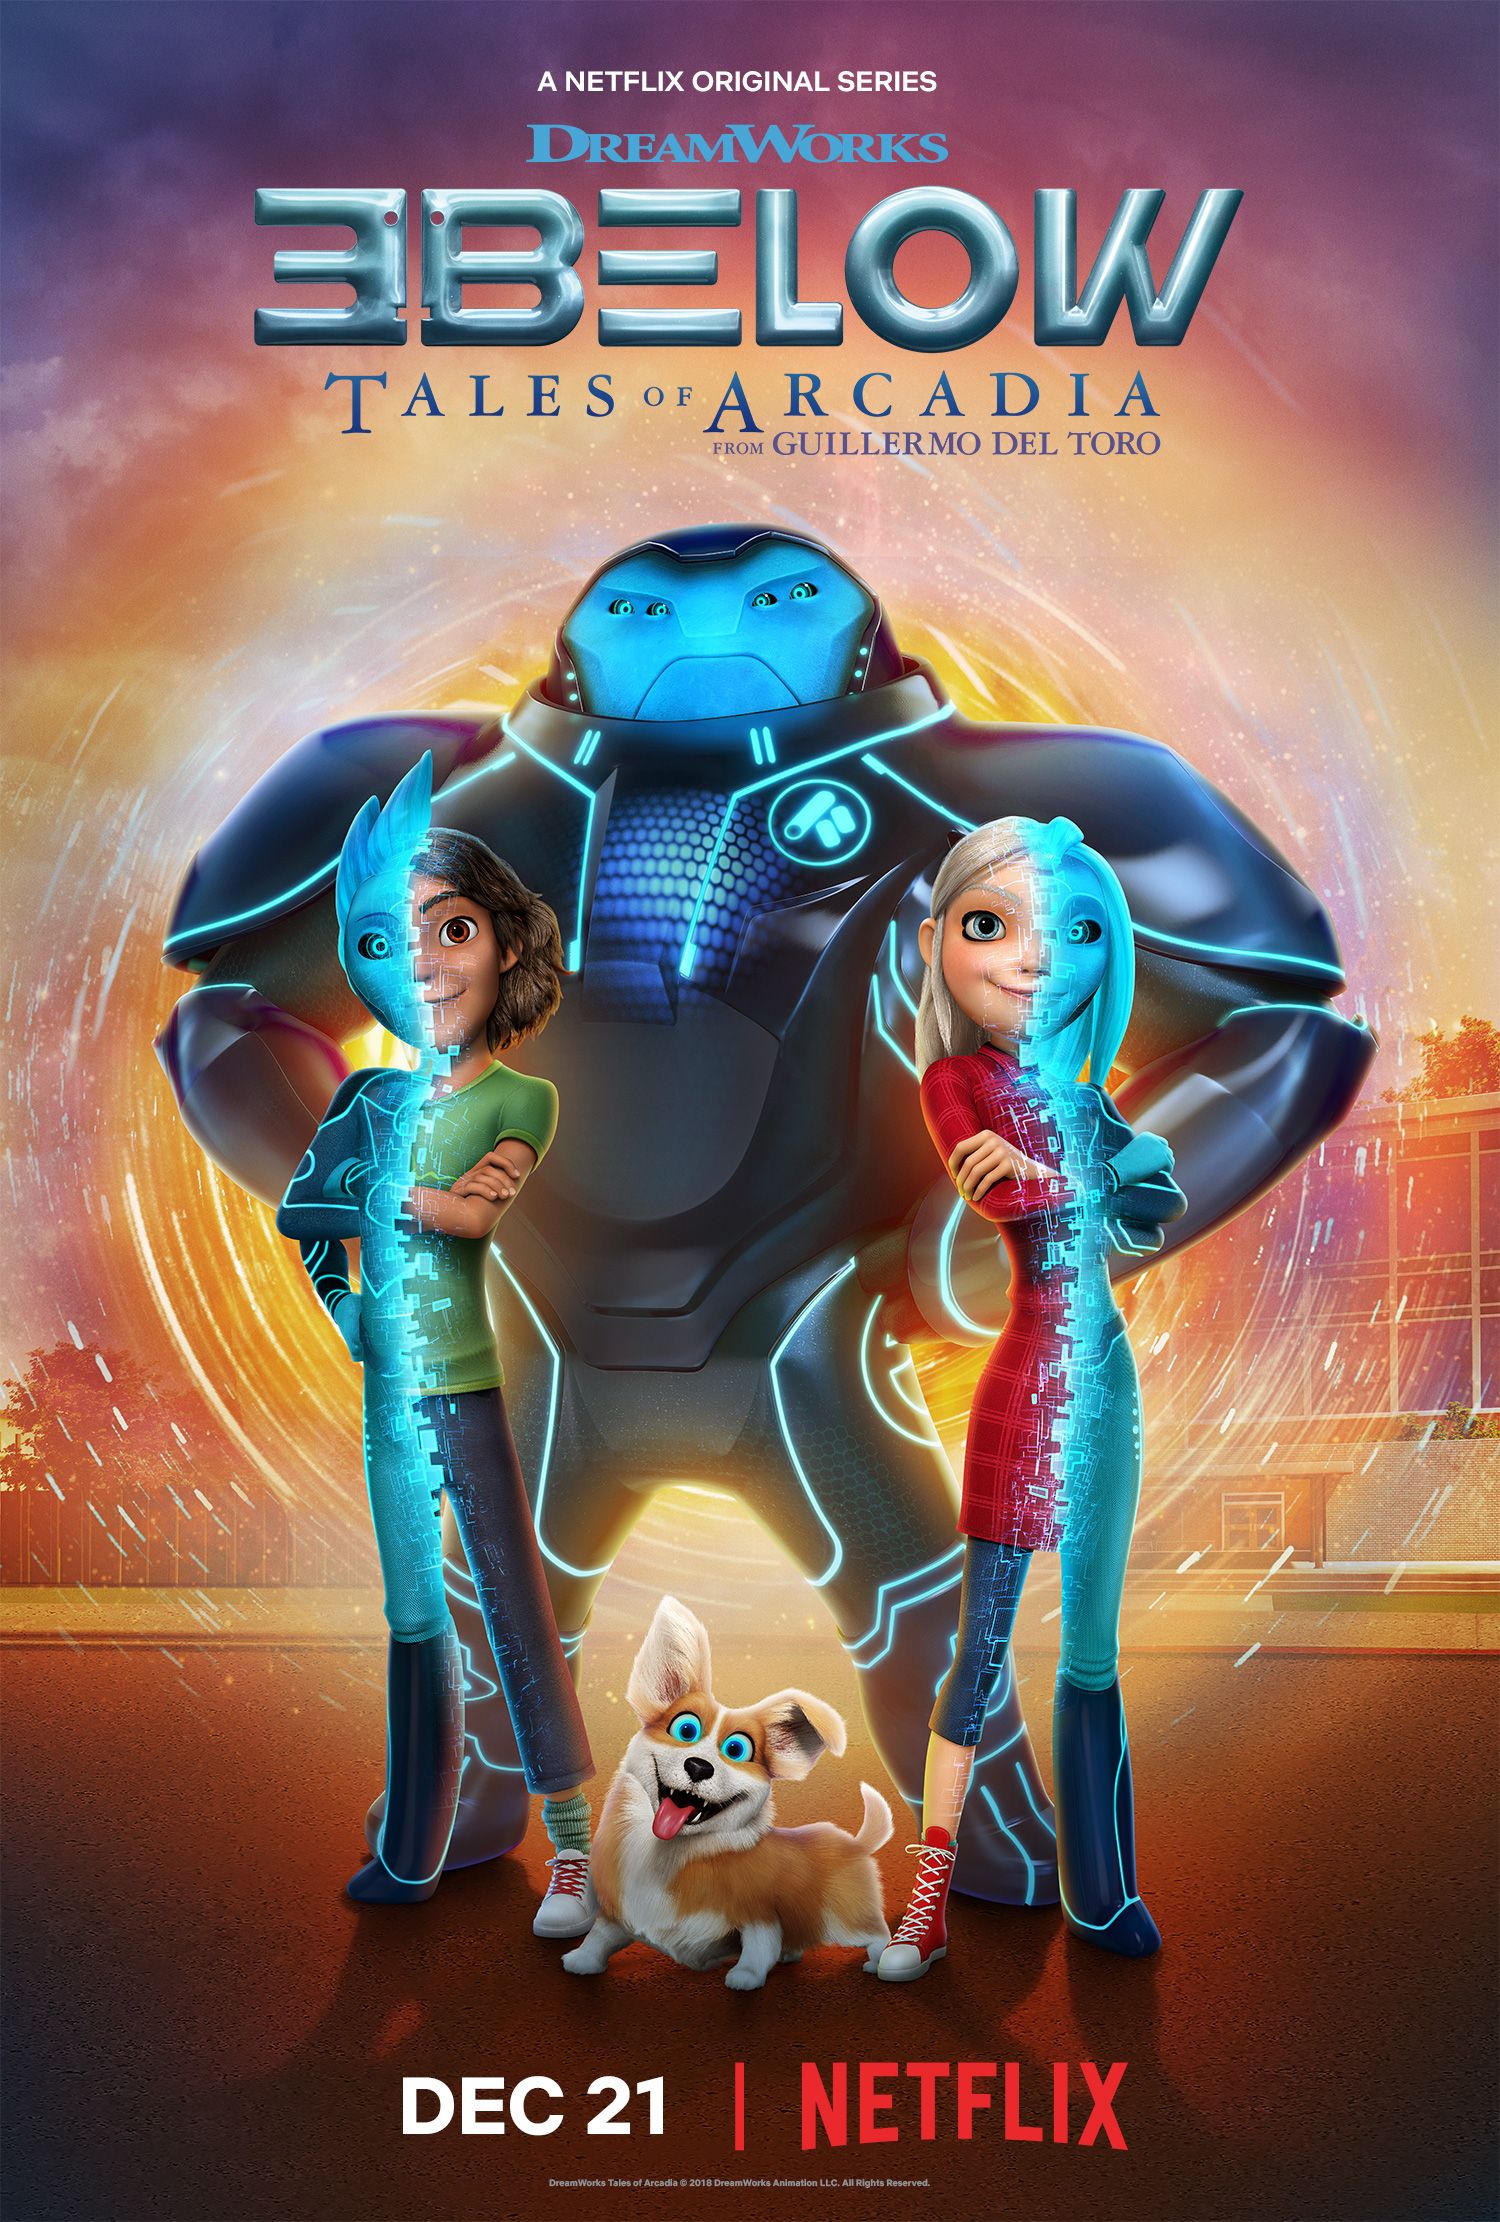 Netflix Releases for DREAMWORKS 3BELOW: TALES OF ARCADIA